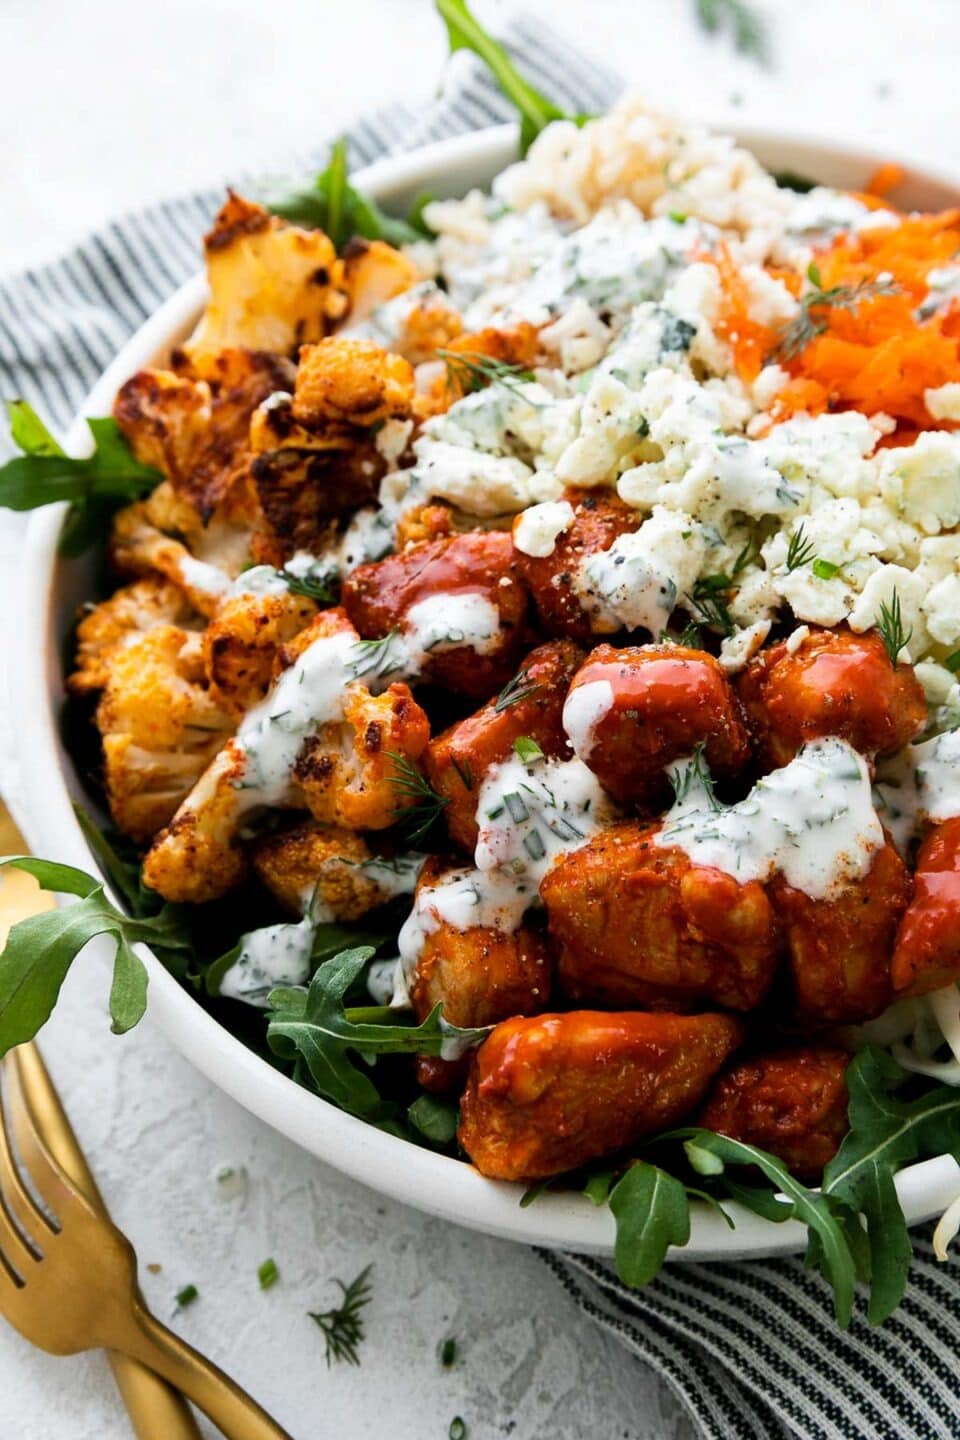 Hearty buffalo chicken bowls with spicy chicken, fresh greens, and brown rice.